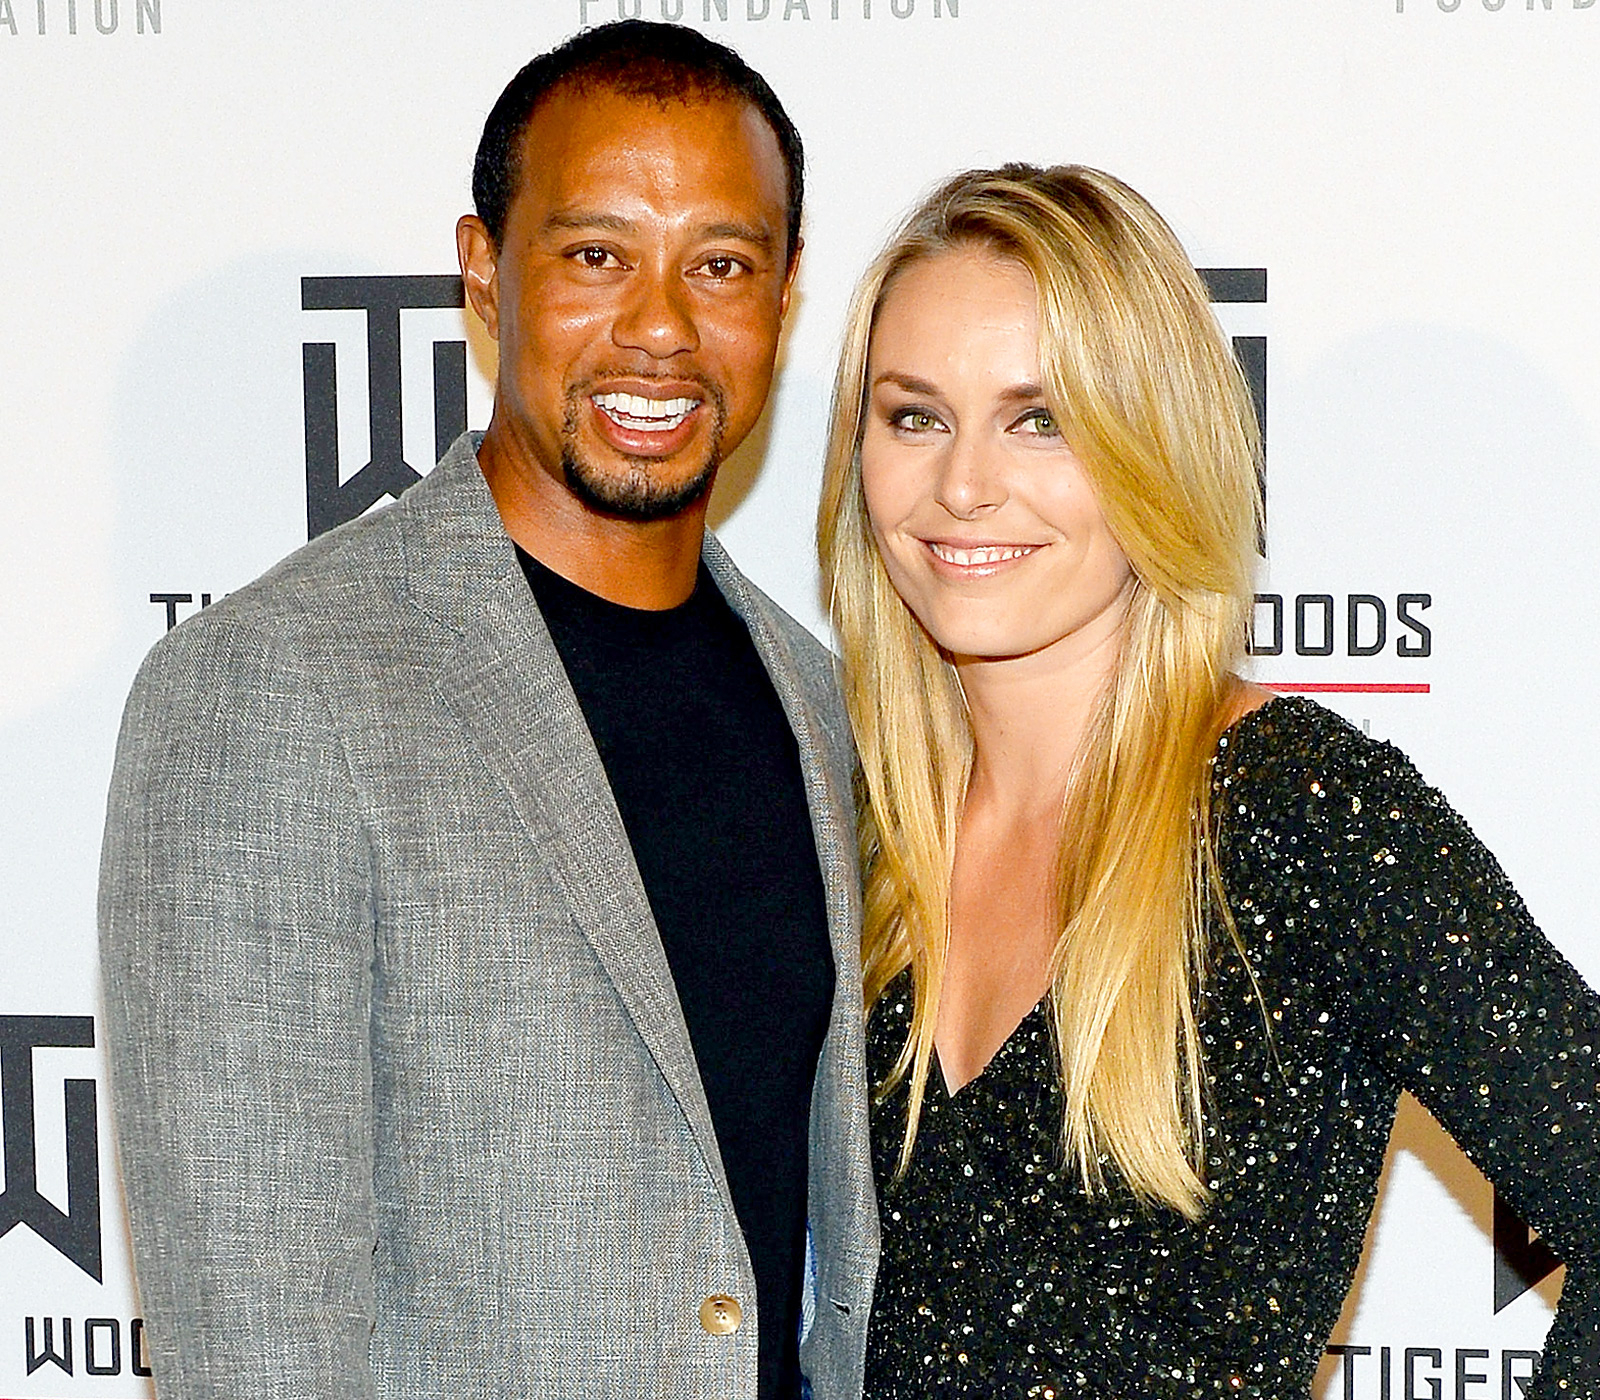 Lindsey Vonn Responds to Leaked Nude Photos of Her and Tiger Woods pic picture